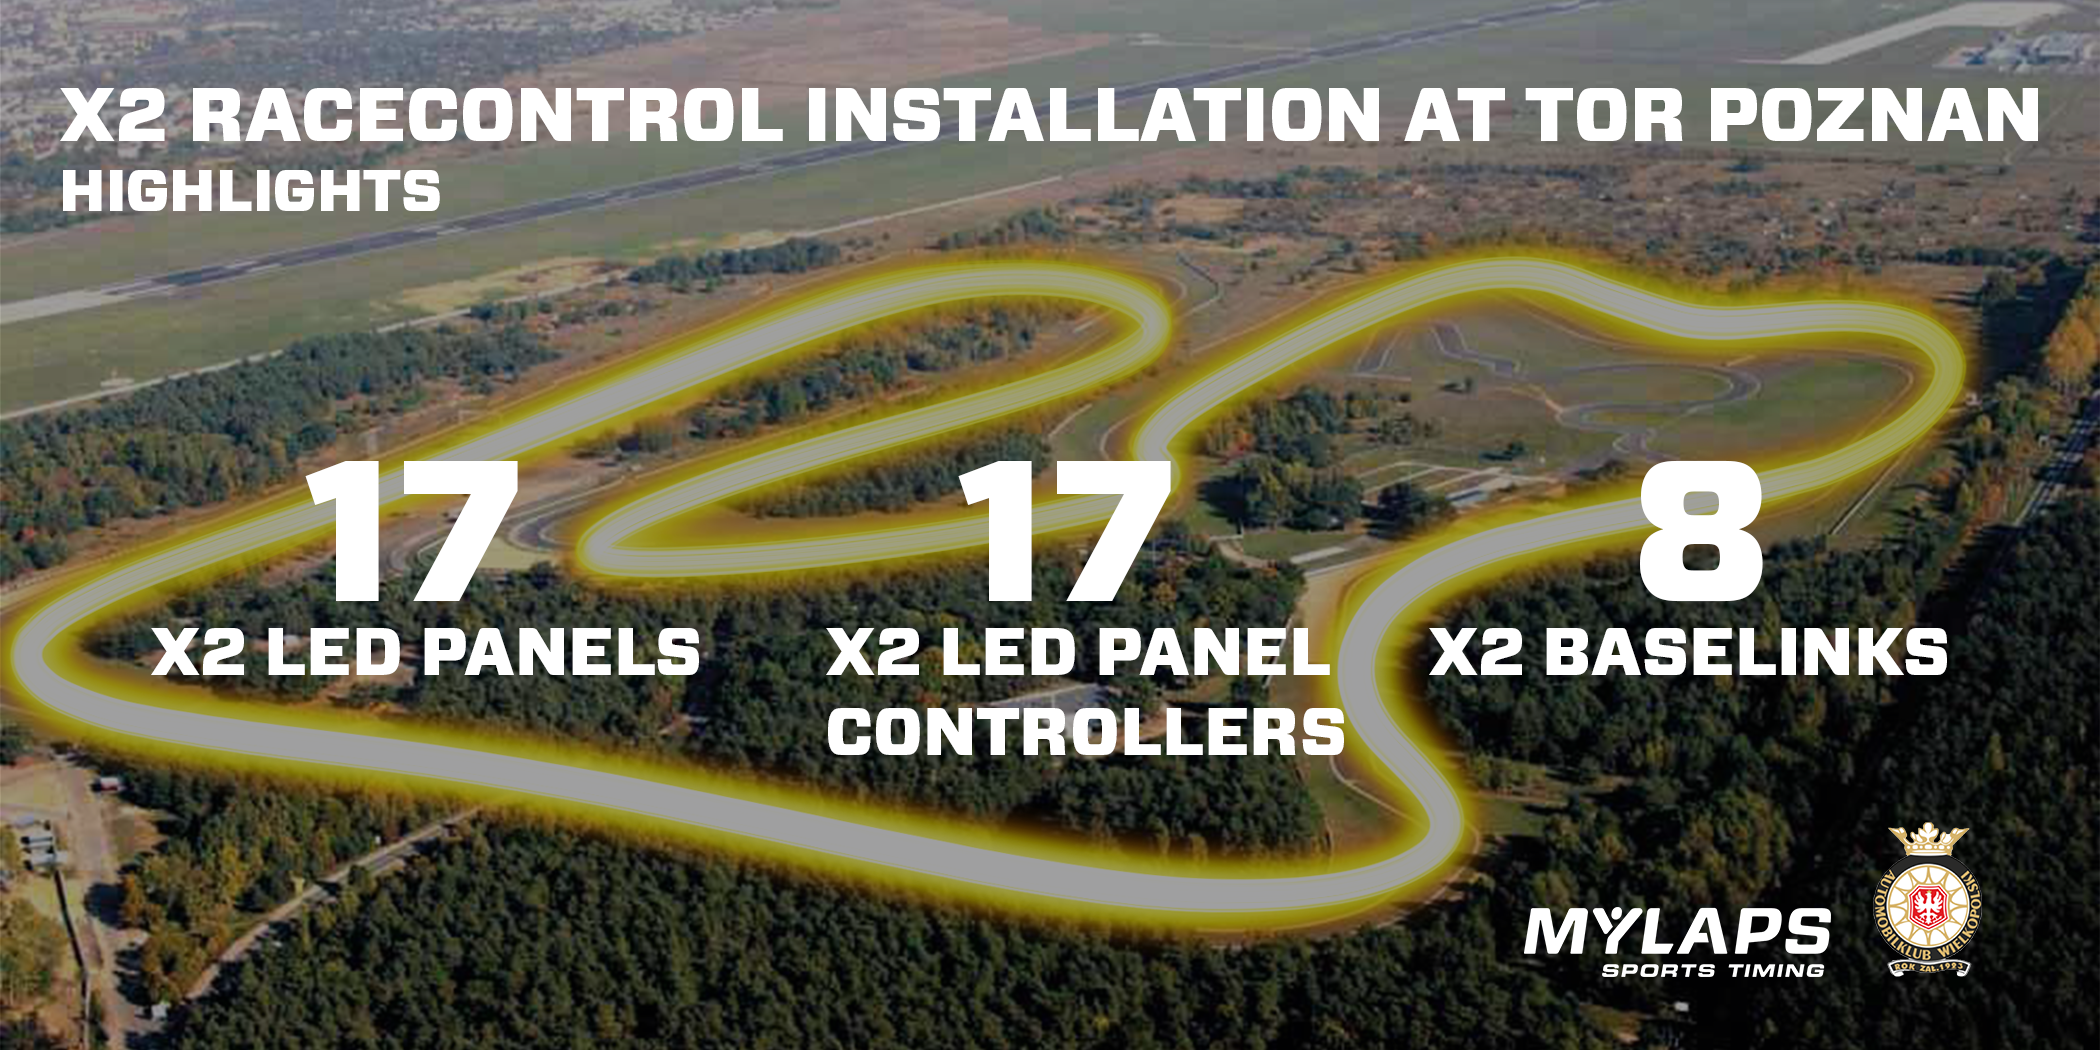 Learn how Tor Poznan Circuit has become one of the most modern circuits in the world